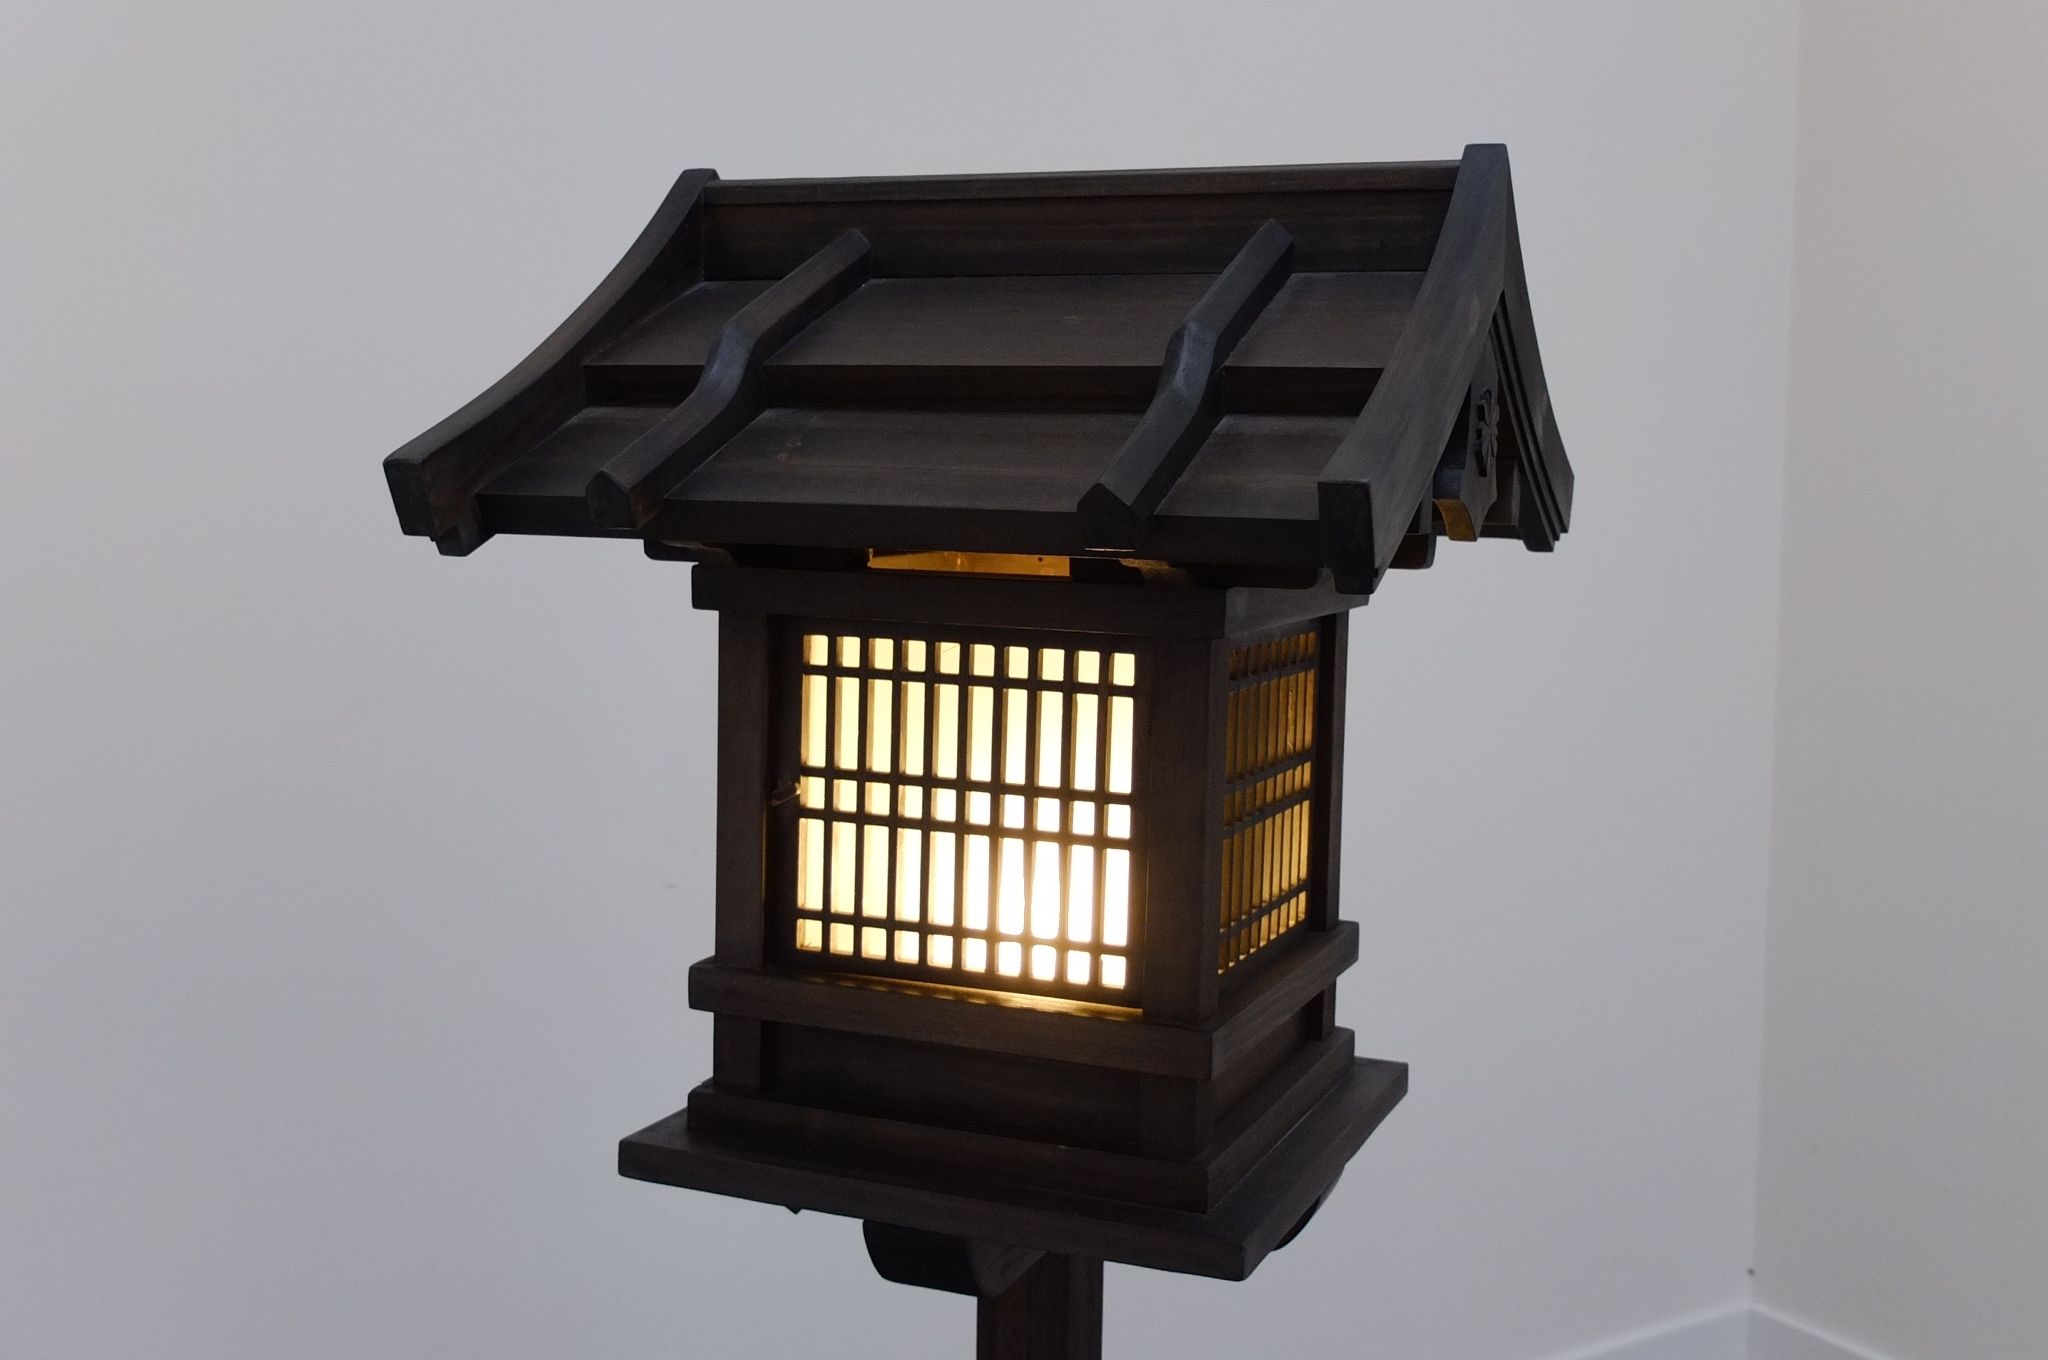 Japanese Wooden Lantern, Outdoor (wl2) – Eastern Classics Intended For Outdoor Oriental Lanterns (View 6 of 20)